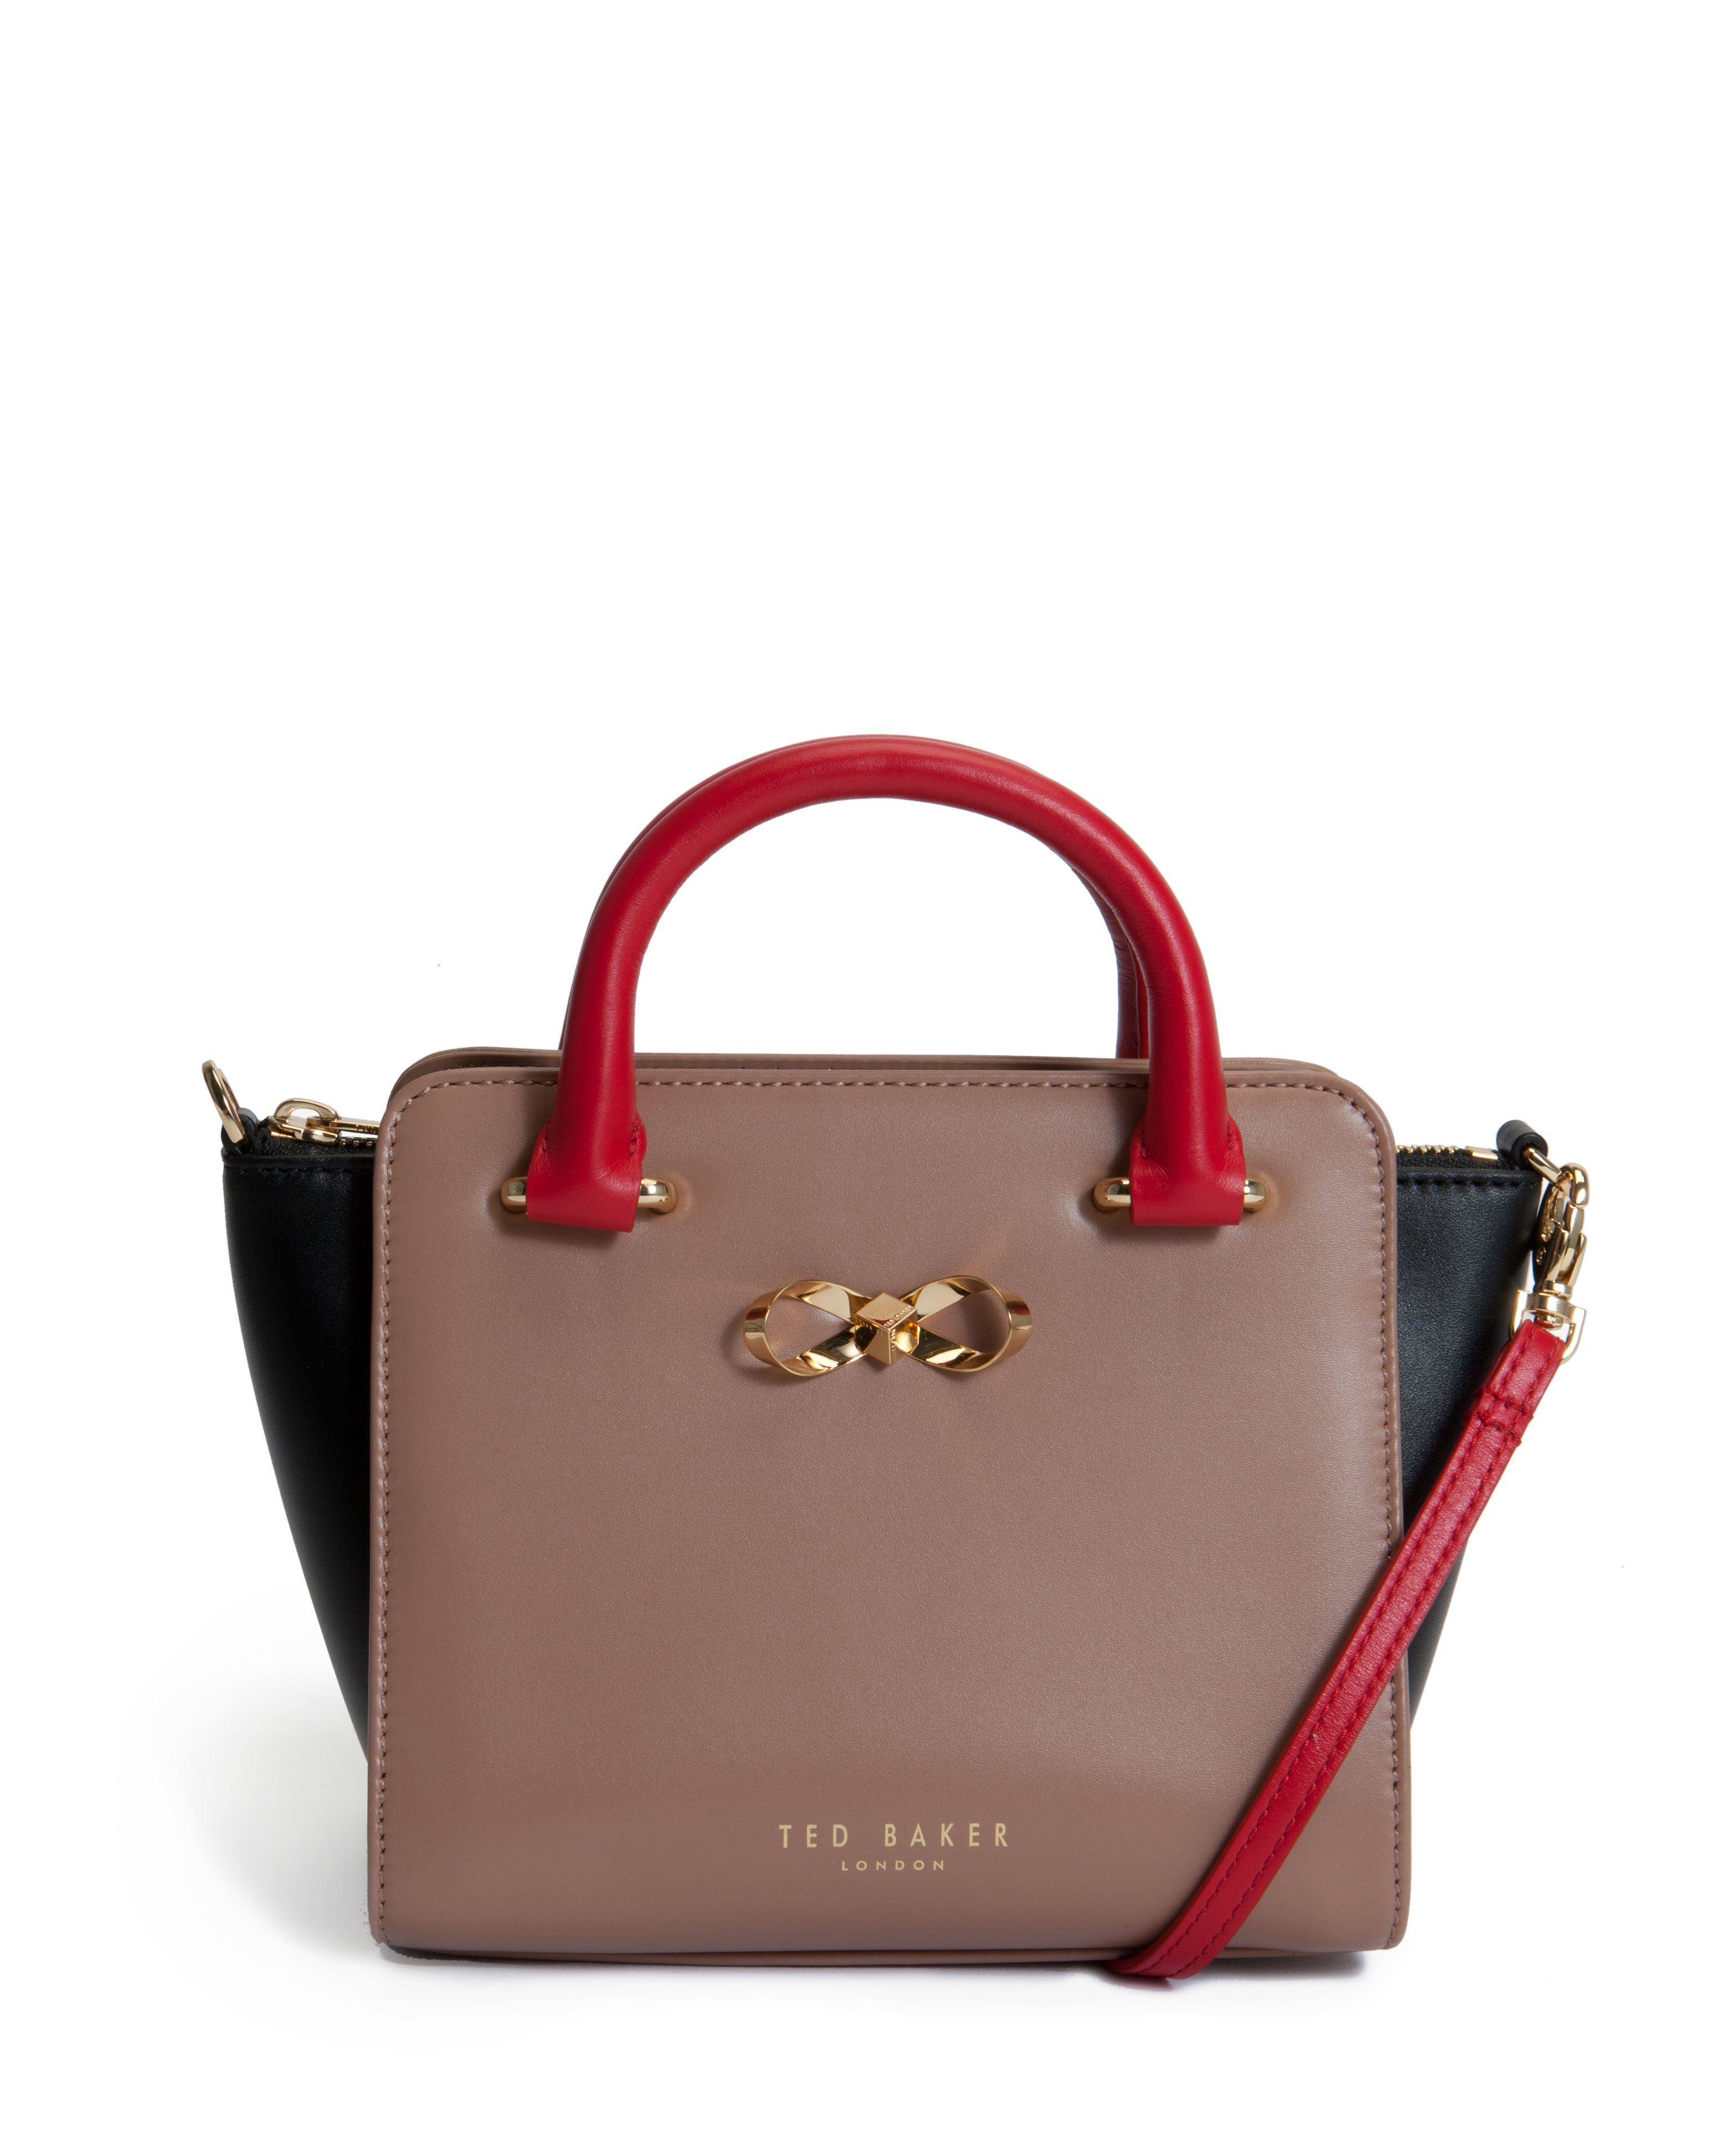 Ted baker Minley Mini Leather Tote Bag in Brown | Lyst